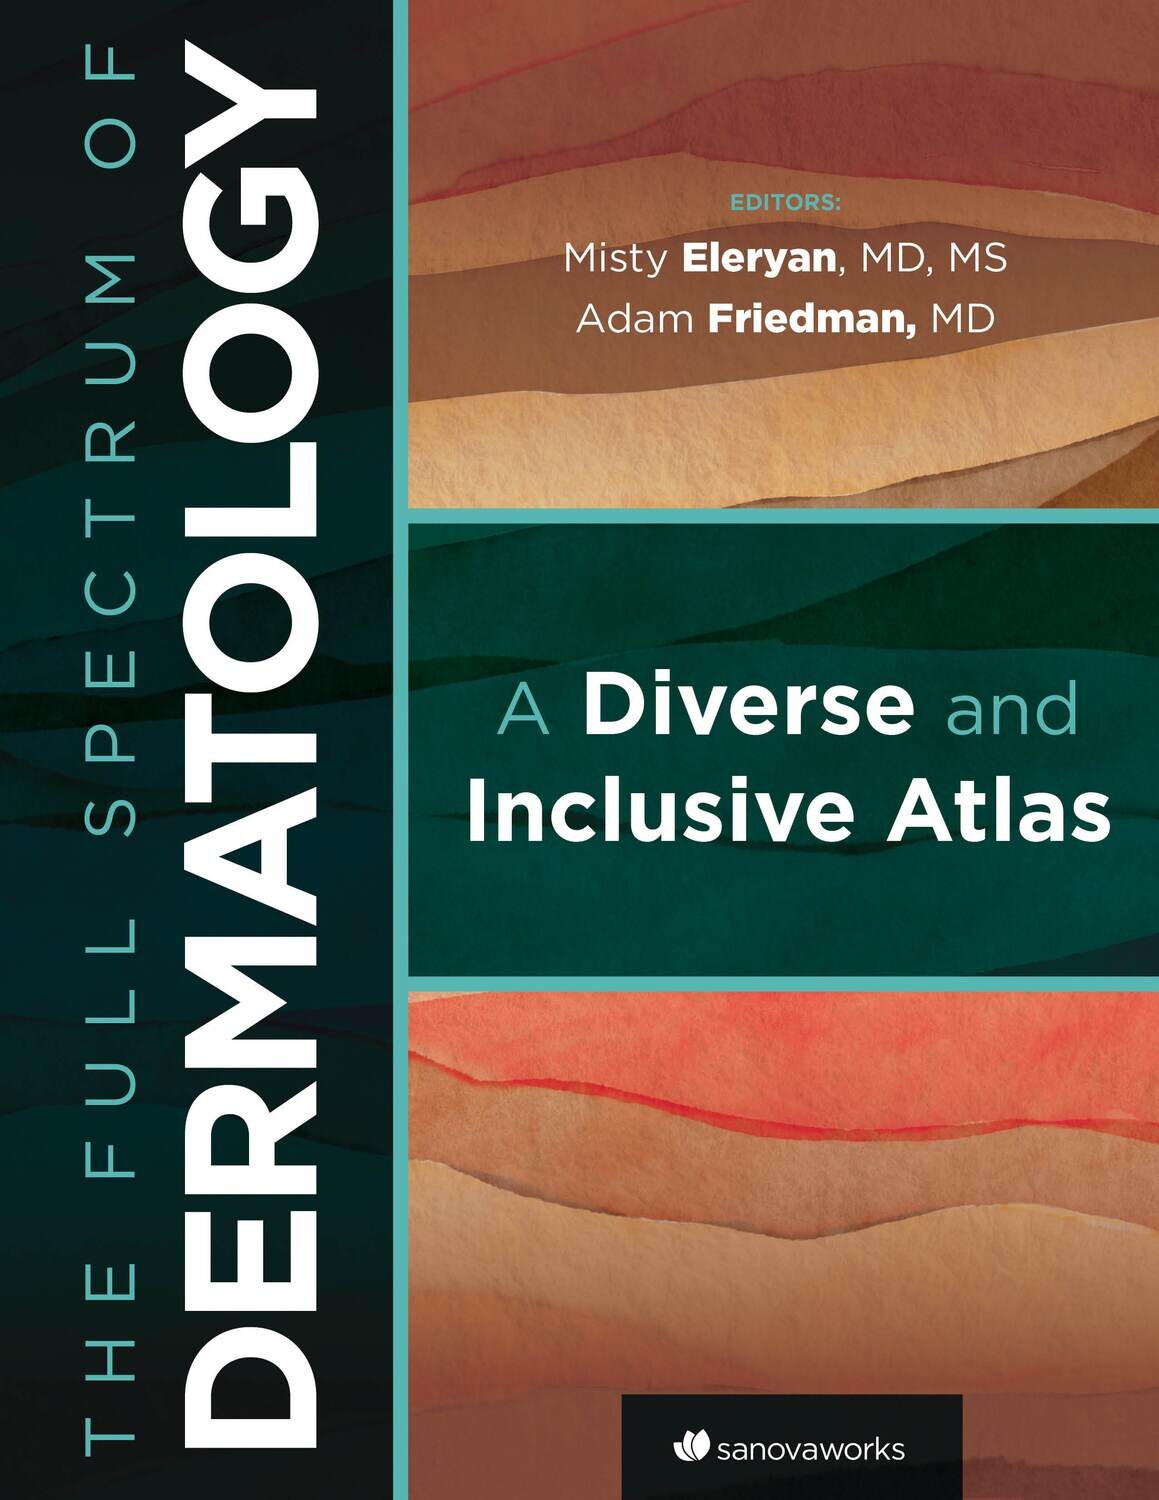 The Full Spectrum of Dermatology: A Diverse and Inclusive Atlas Digital Edition